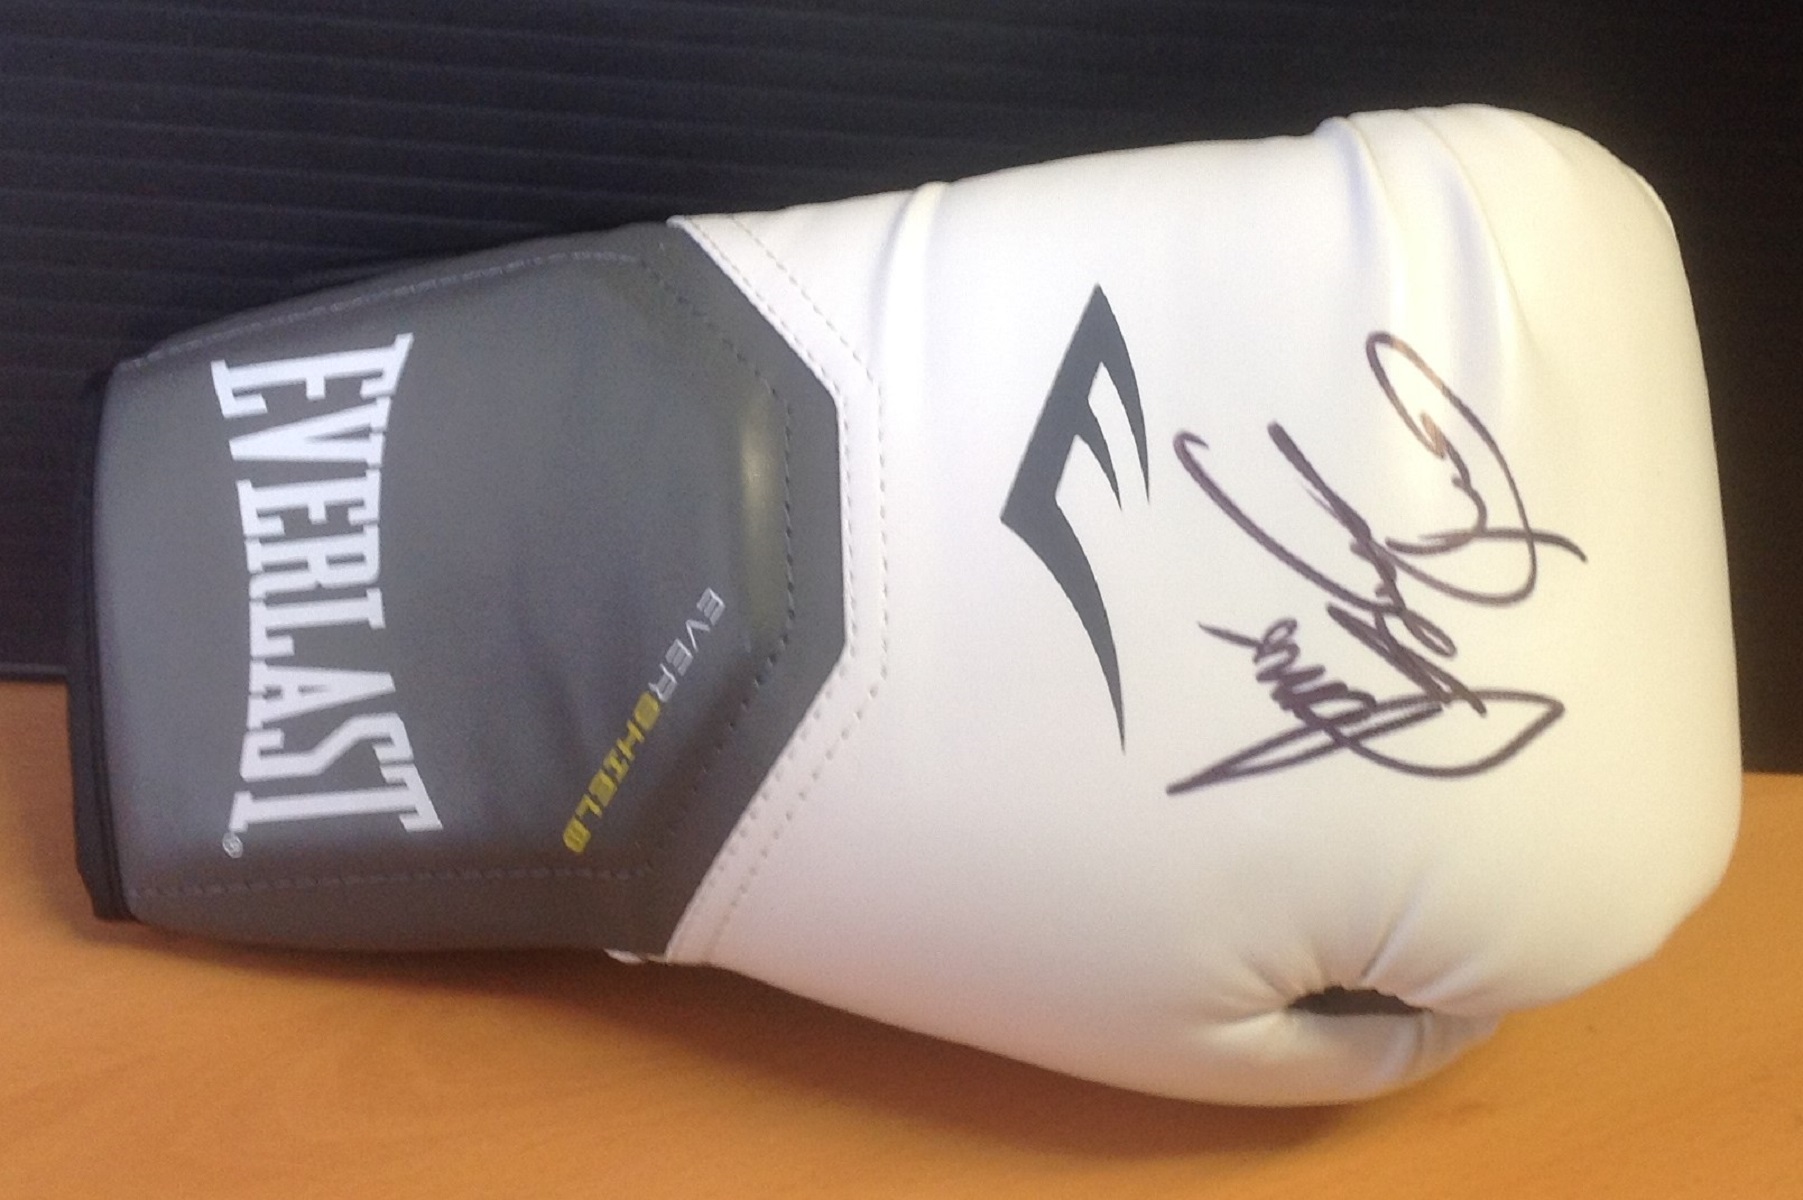 Boxing Glove White/Black/Grey 12oz Everlast signed at the IBHOF in 2017 by James "Lights Out" Toney.